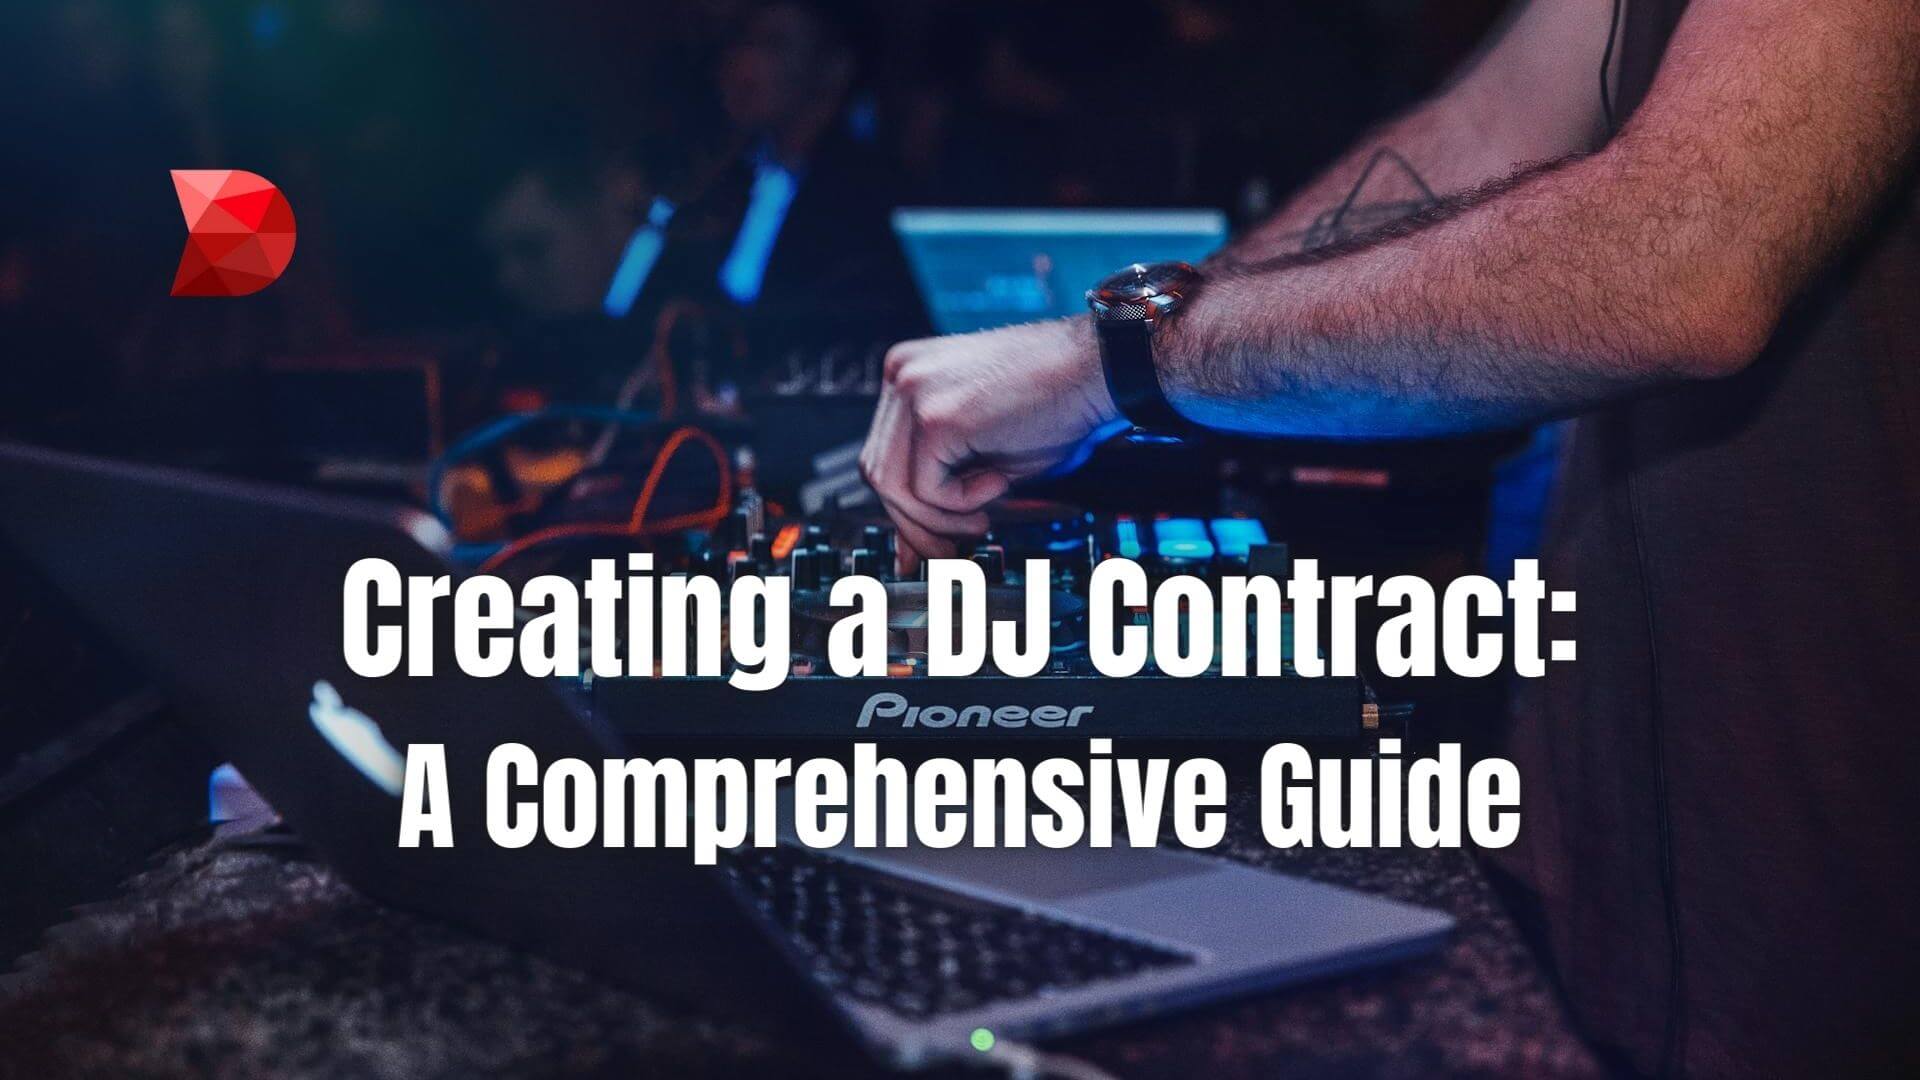 Unlock the secrets of crafting a DJ contract with our complete guide. Learn essential clauses and tips for creating foolproof agreements.